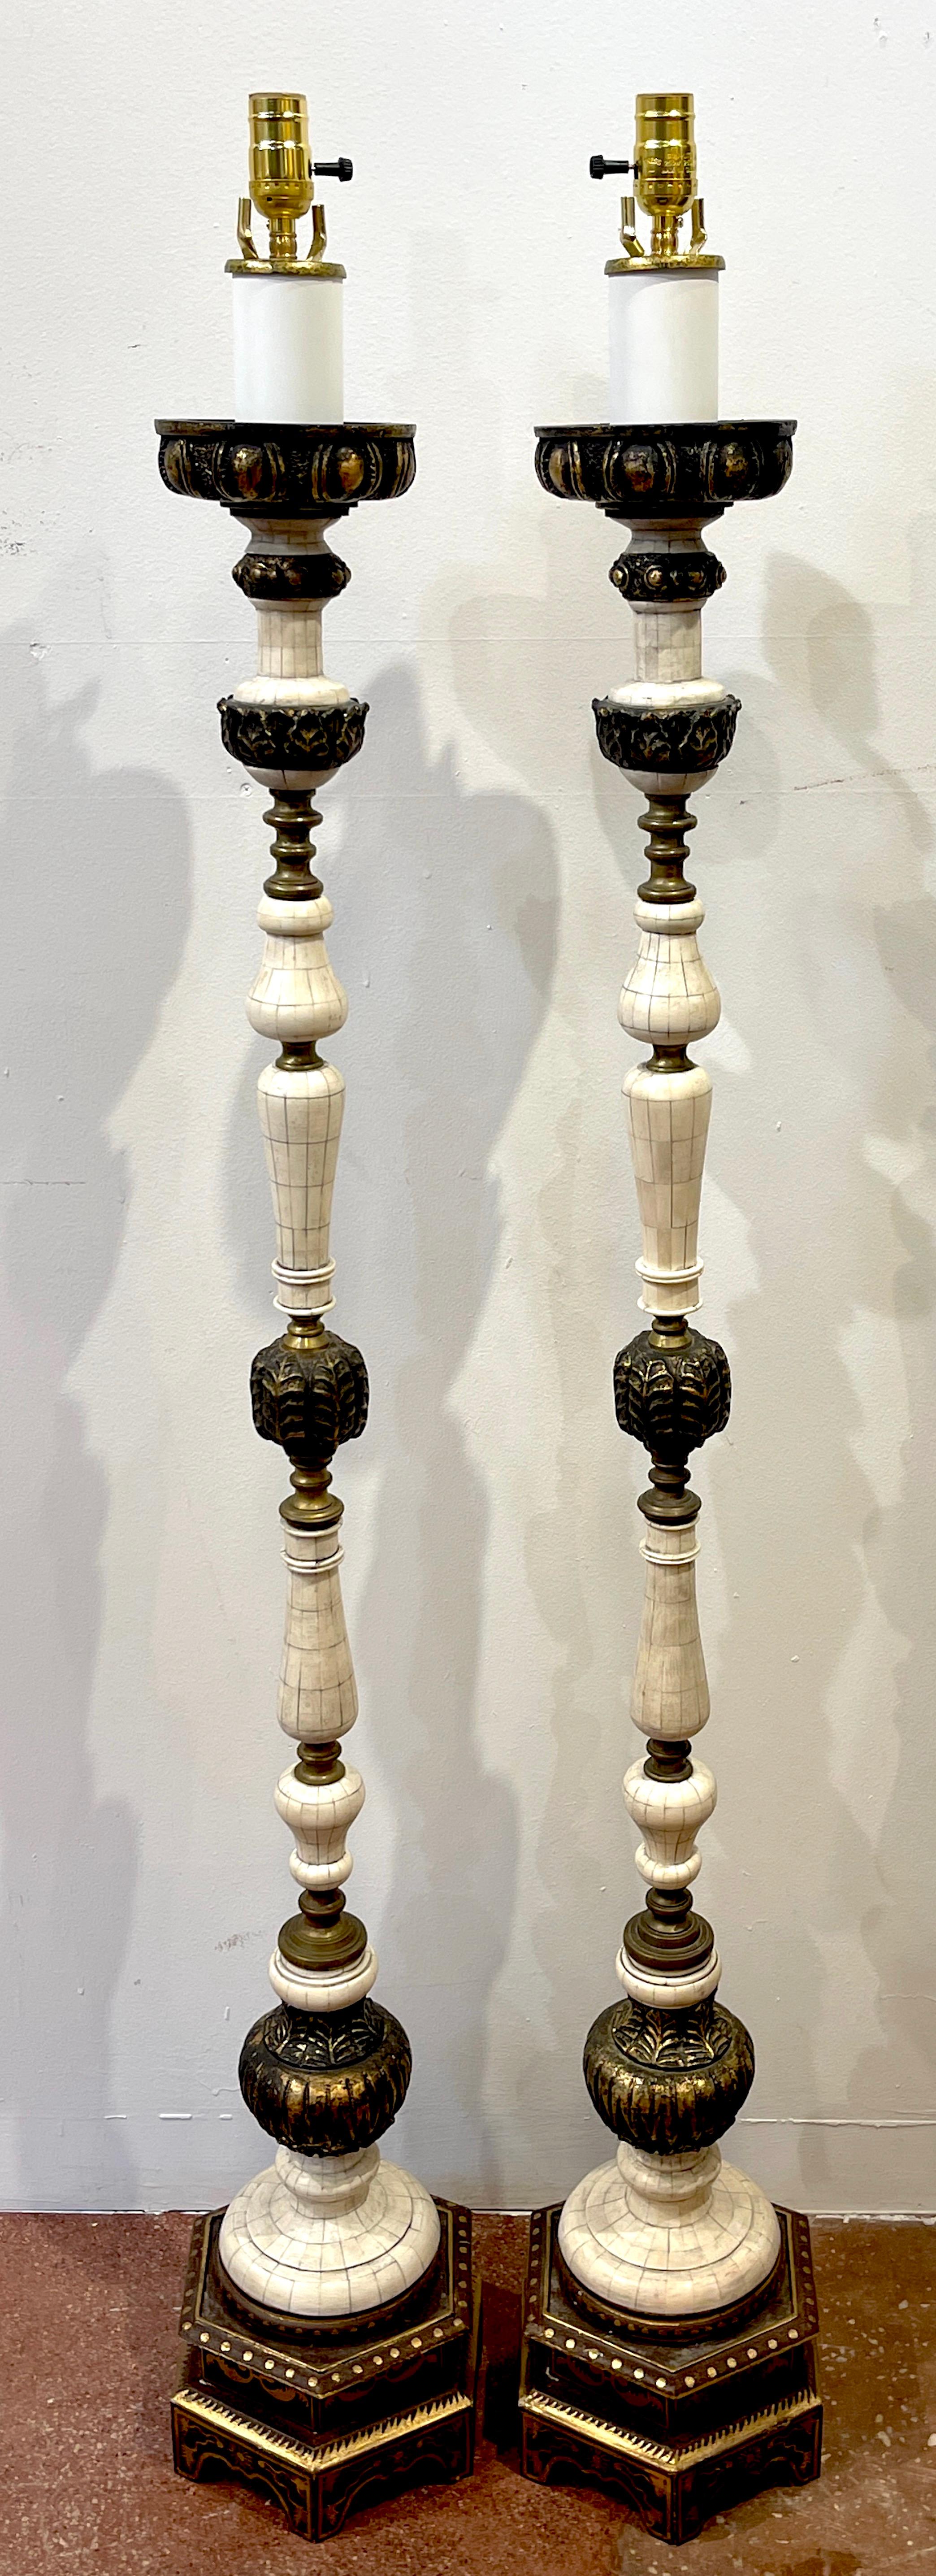 Pair of Anglo-Indian Inlaid Bone & Gilt Columnar Floor Lamps, Each one of tapered columnar with mosaic/inlaid bone sections, separated by gilt lacquered, polychromed acanthus mounts. Resting on 10-Inch diameter hexagonal bases.
Shown with 20